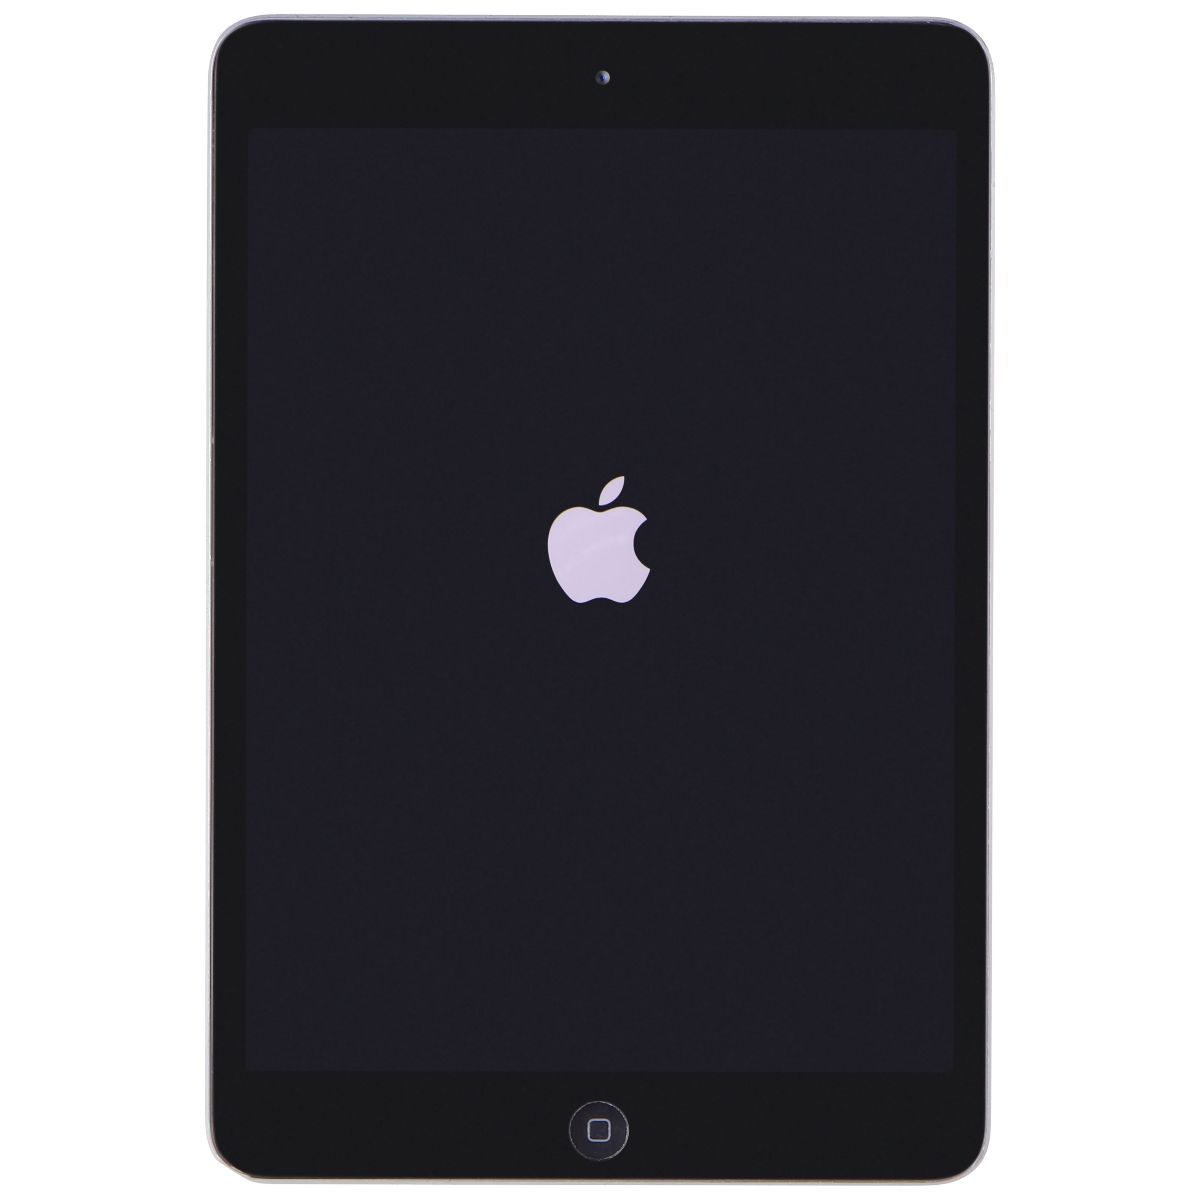 Apple iPad mini 2 (Wi-Fi Only) A1489 - 16GB/Space Gray (ME276LL/A) iPads, Tablets & eBook Readers Apple    - Simple Cell Bulk Wholesale Pricing - USA Seller